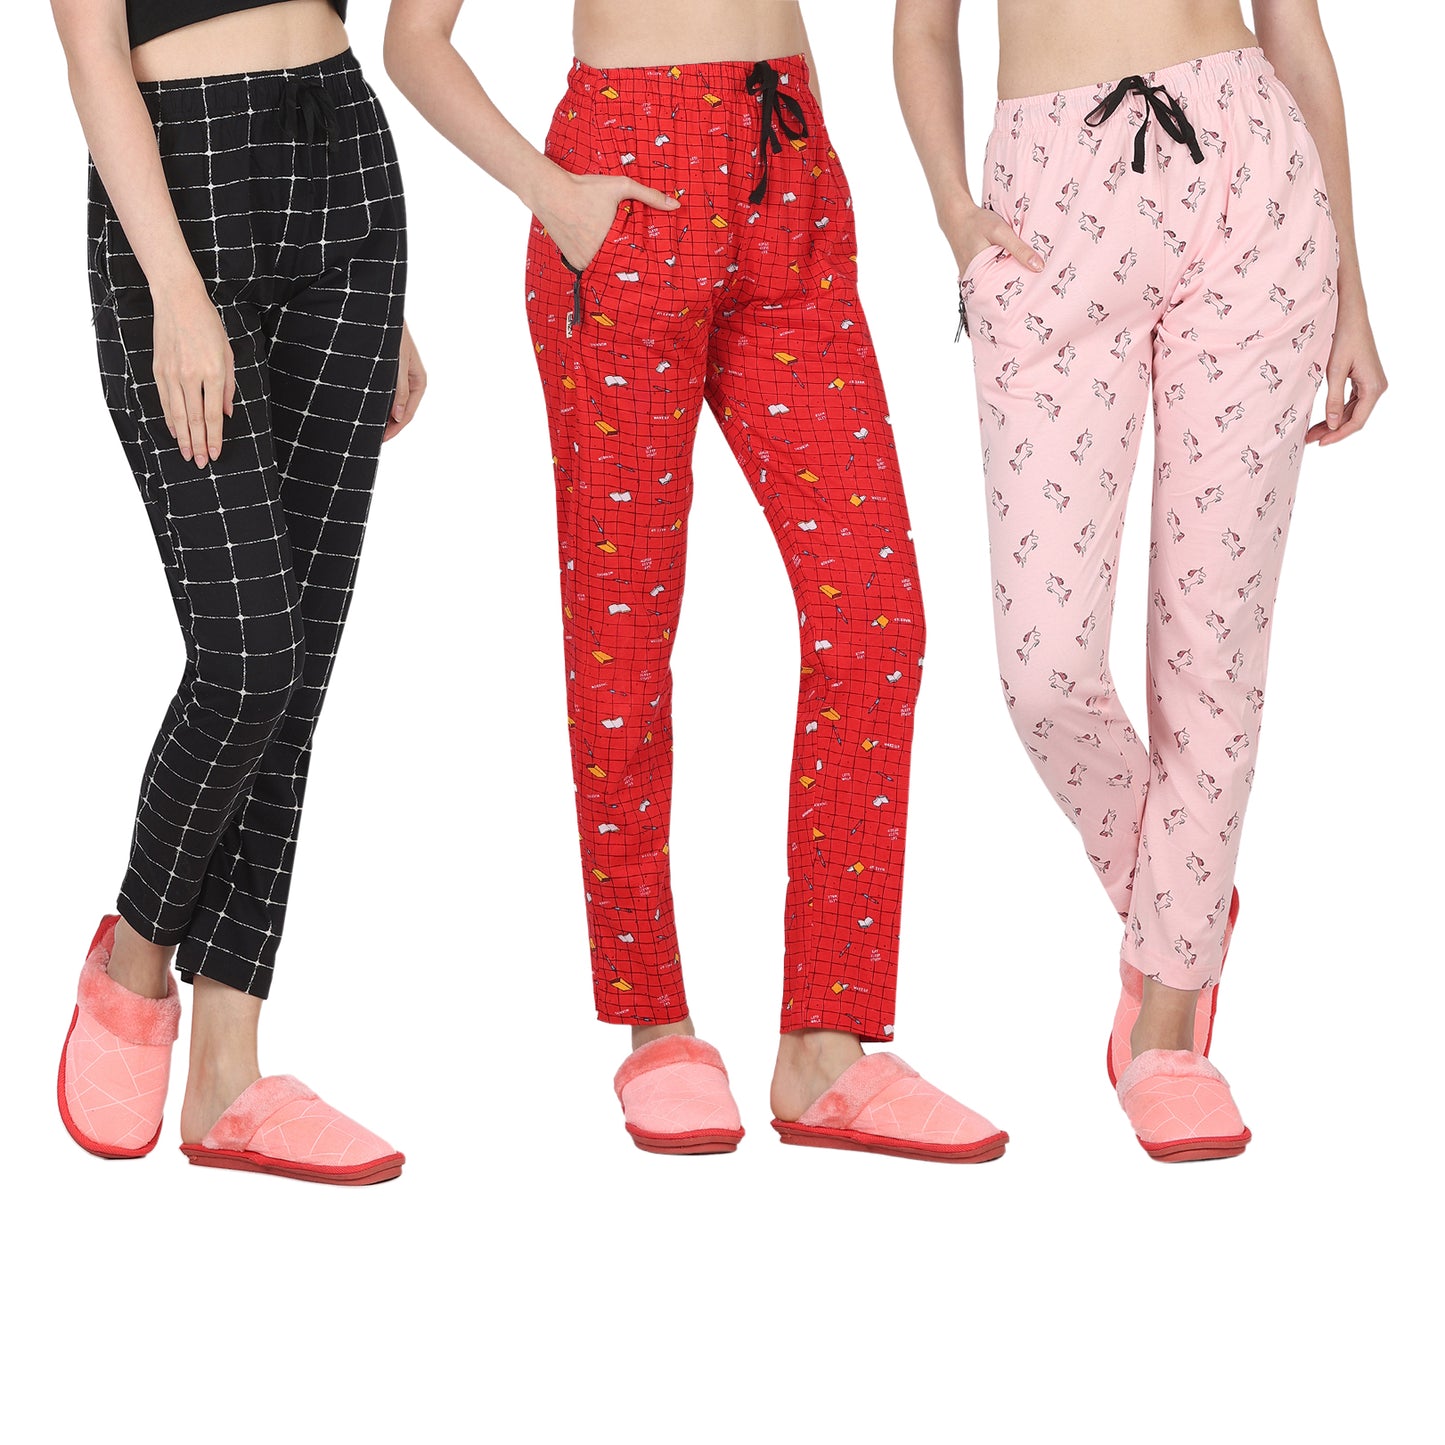 Eazy Women's Printed Lower - Pack of 3 - Black, Bright Red & Light Pink